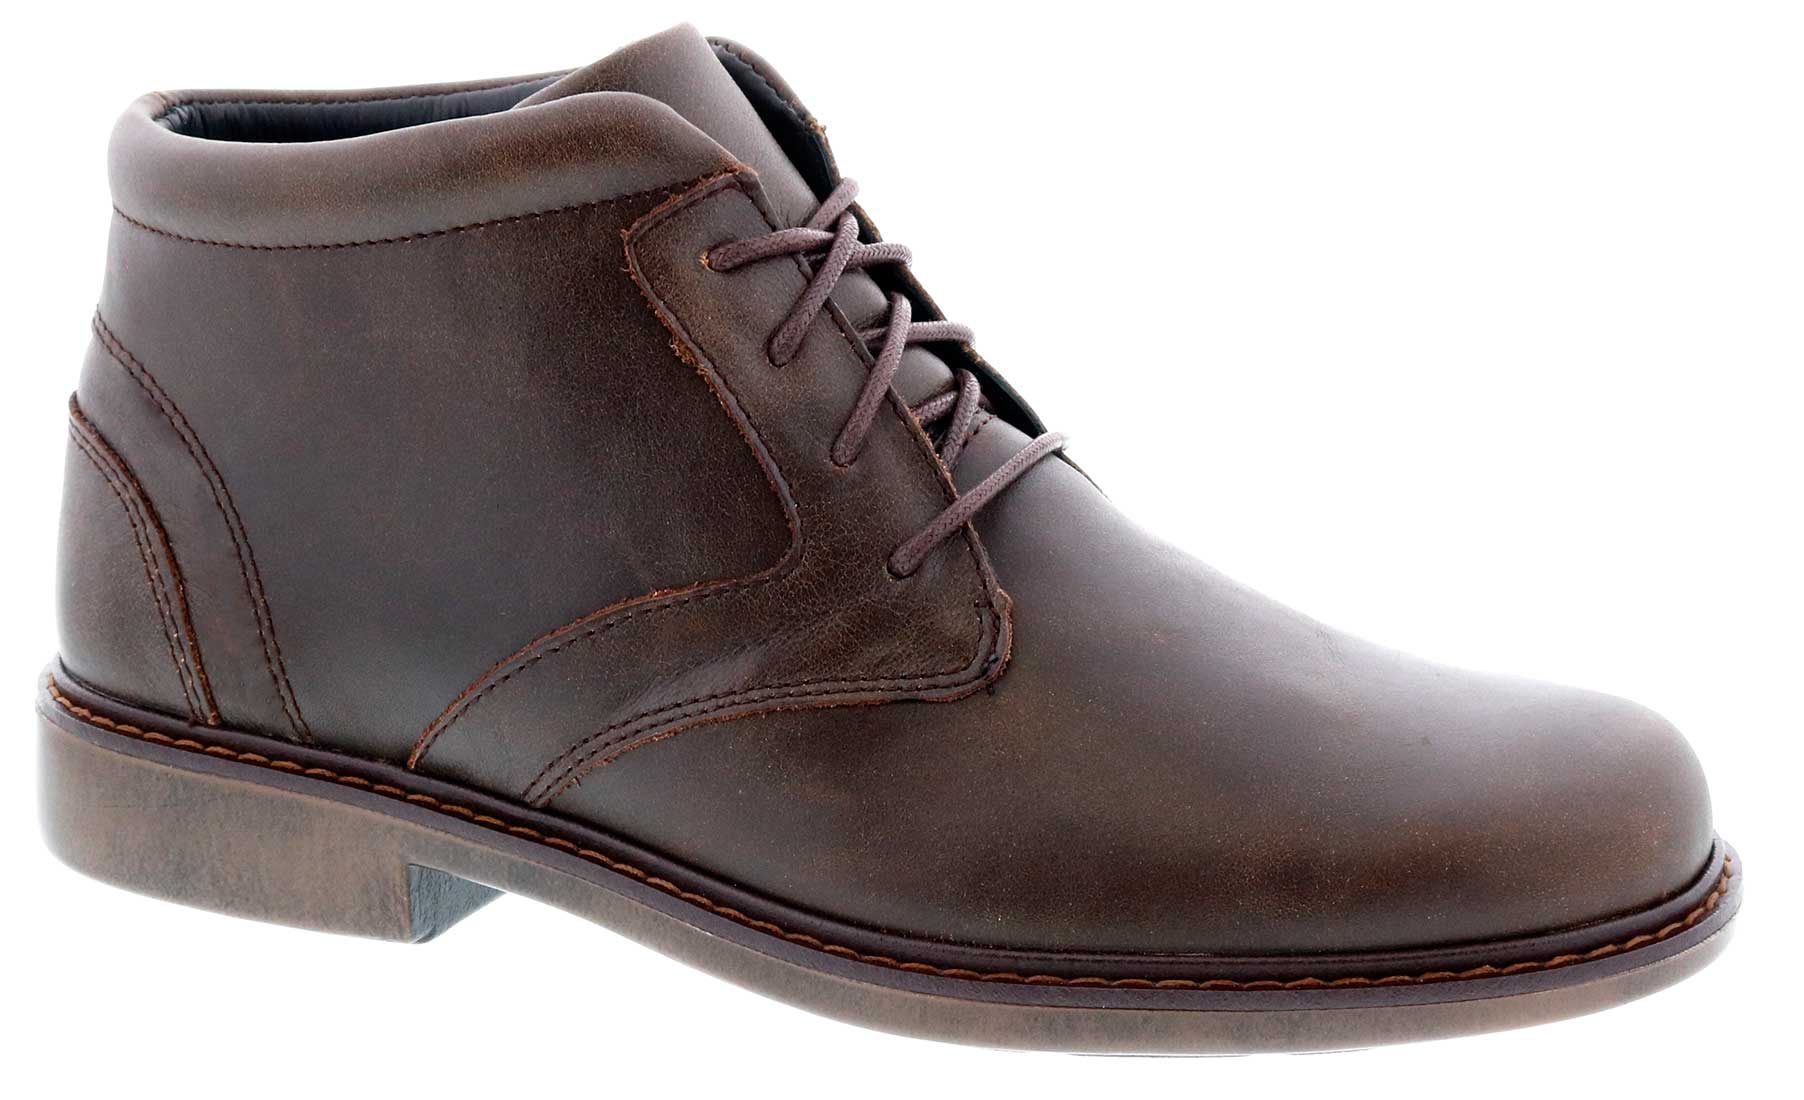 Drew Shoes Bronx 40100 - Men's - Casual Chukka 2 Boot - Comfort Therapeutic Diabetic Boot - Extra Depth - Extra Wide